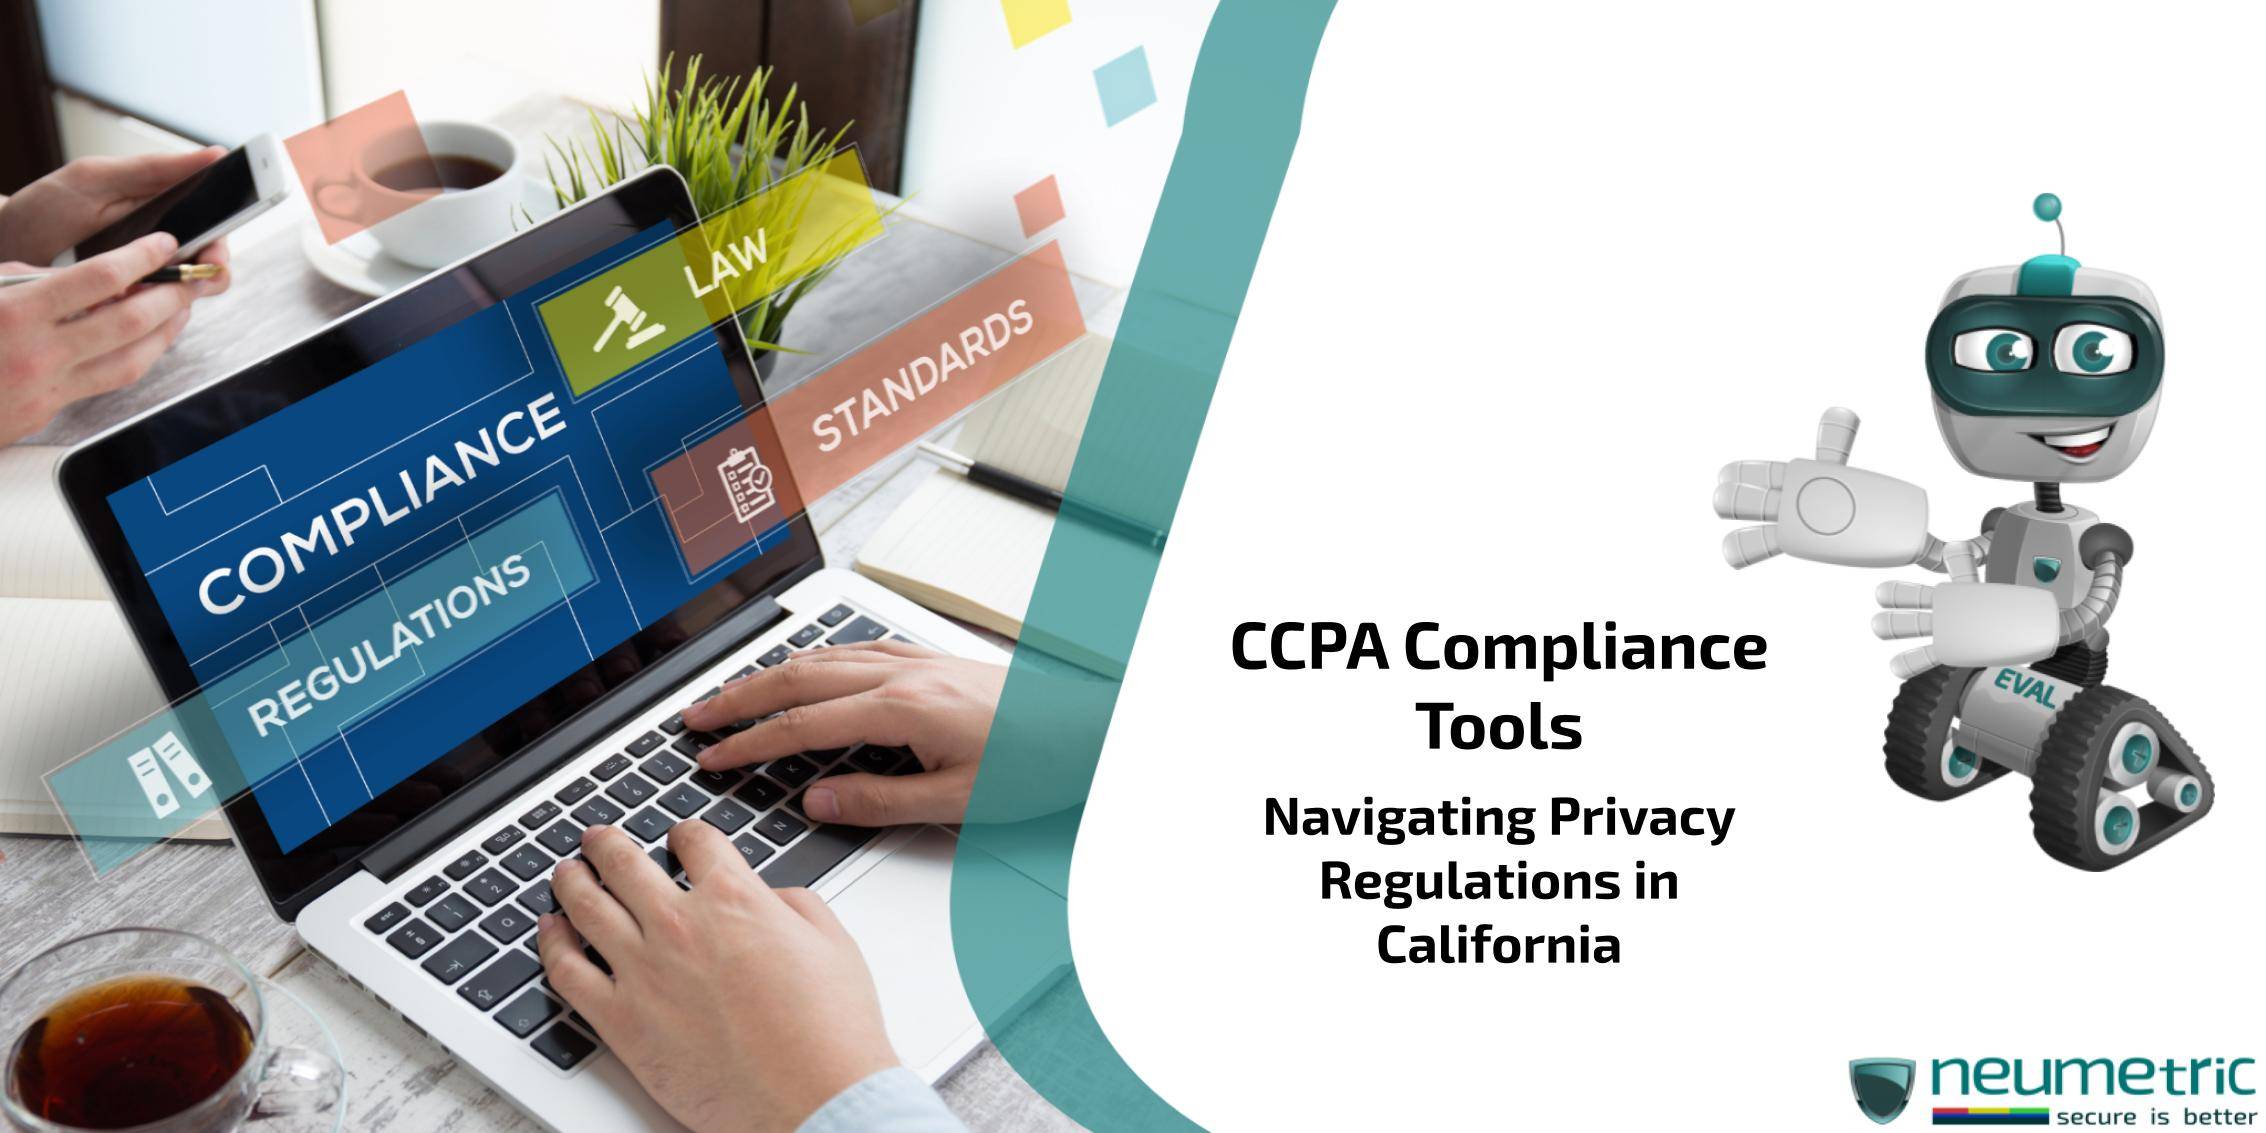 CCPA Compliance Tools: Navigating Privacy Regulations in California